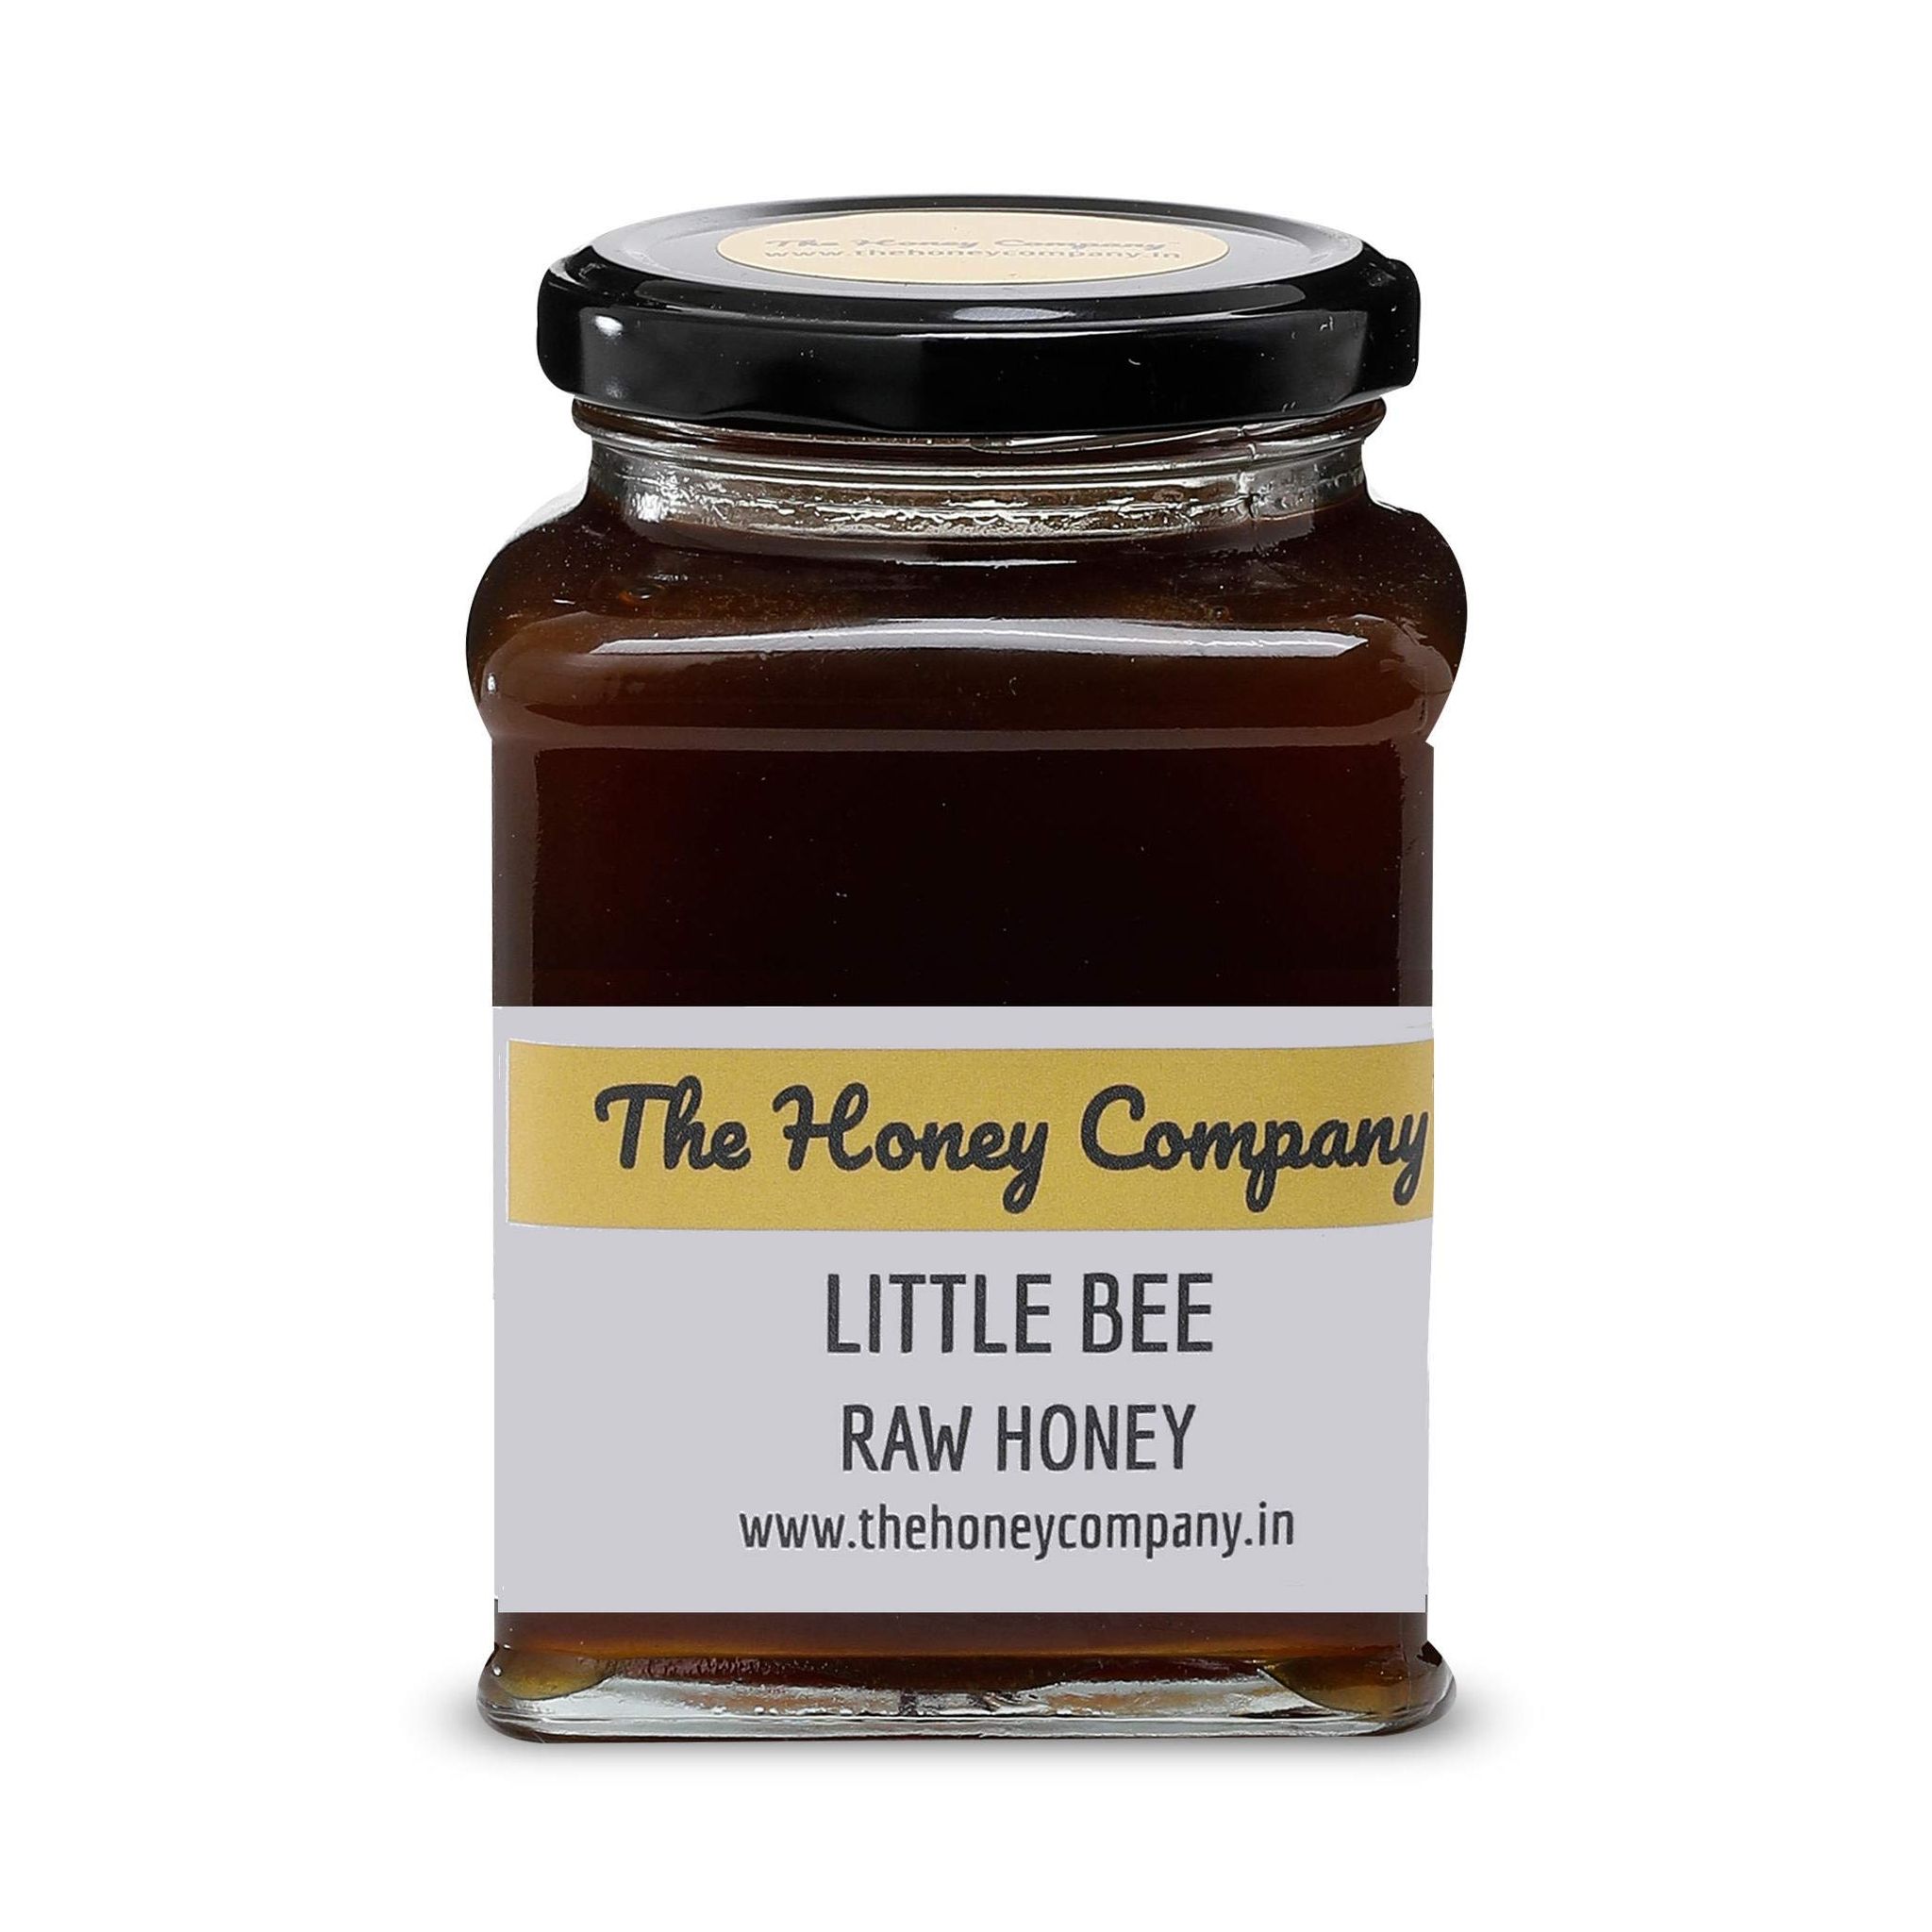 The Honey Company Little Bee Raw Honey 1 KG 100% Pure Natural Raw Unprocessed Unheated Unpasteurised Unfiltered